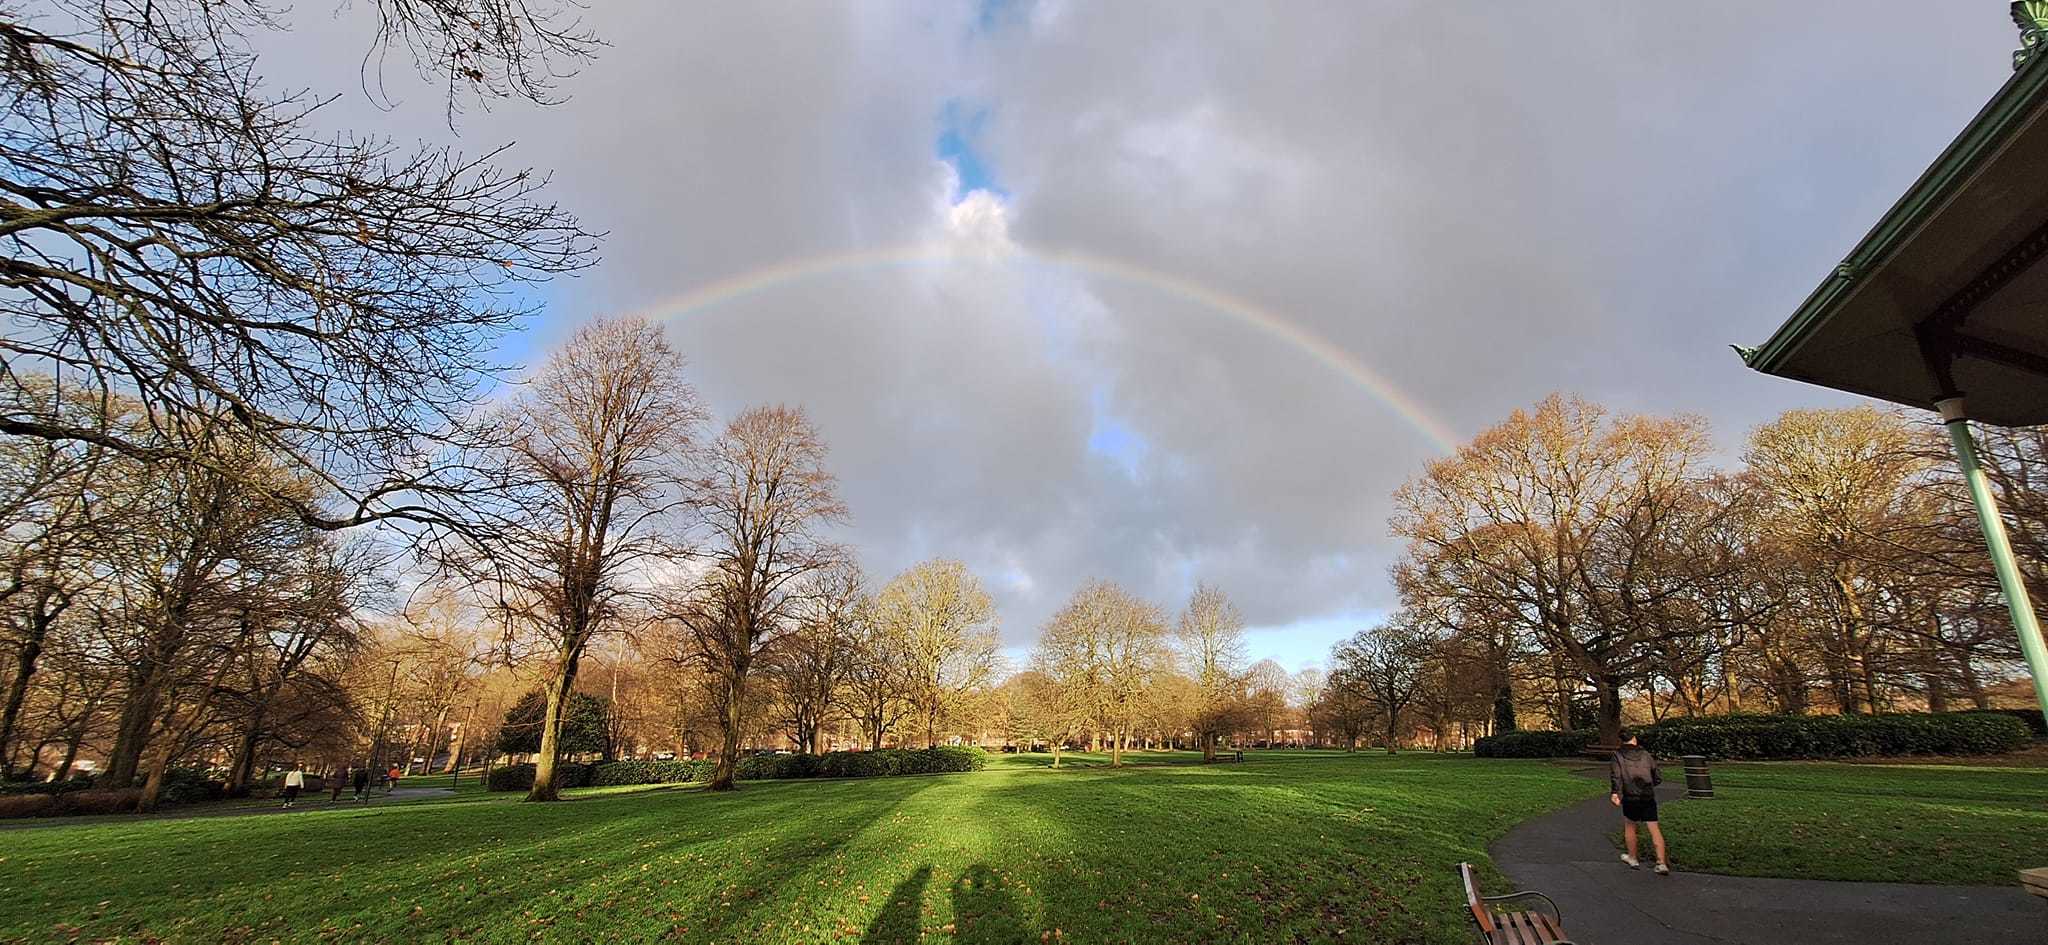 A rainbow over the park by Karen ODowd